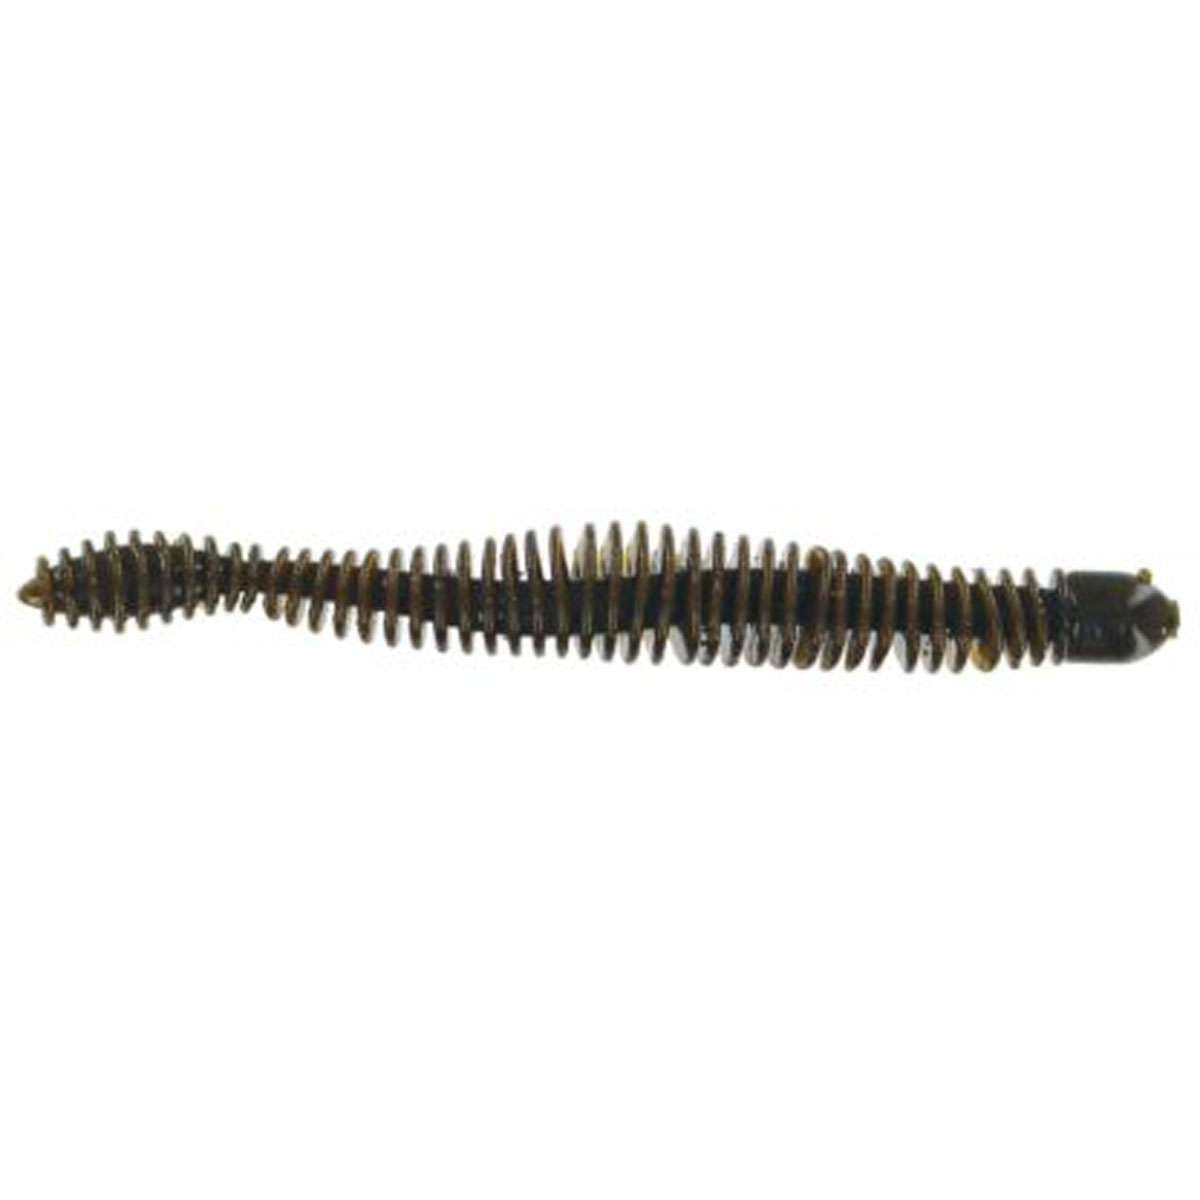 Big Bite Baits Coontail Worm - 4.75 inch, Pack of 7 - Green Pumpkin ...